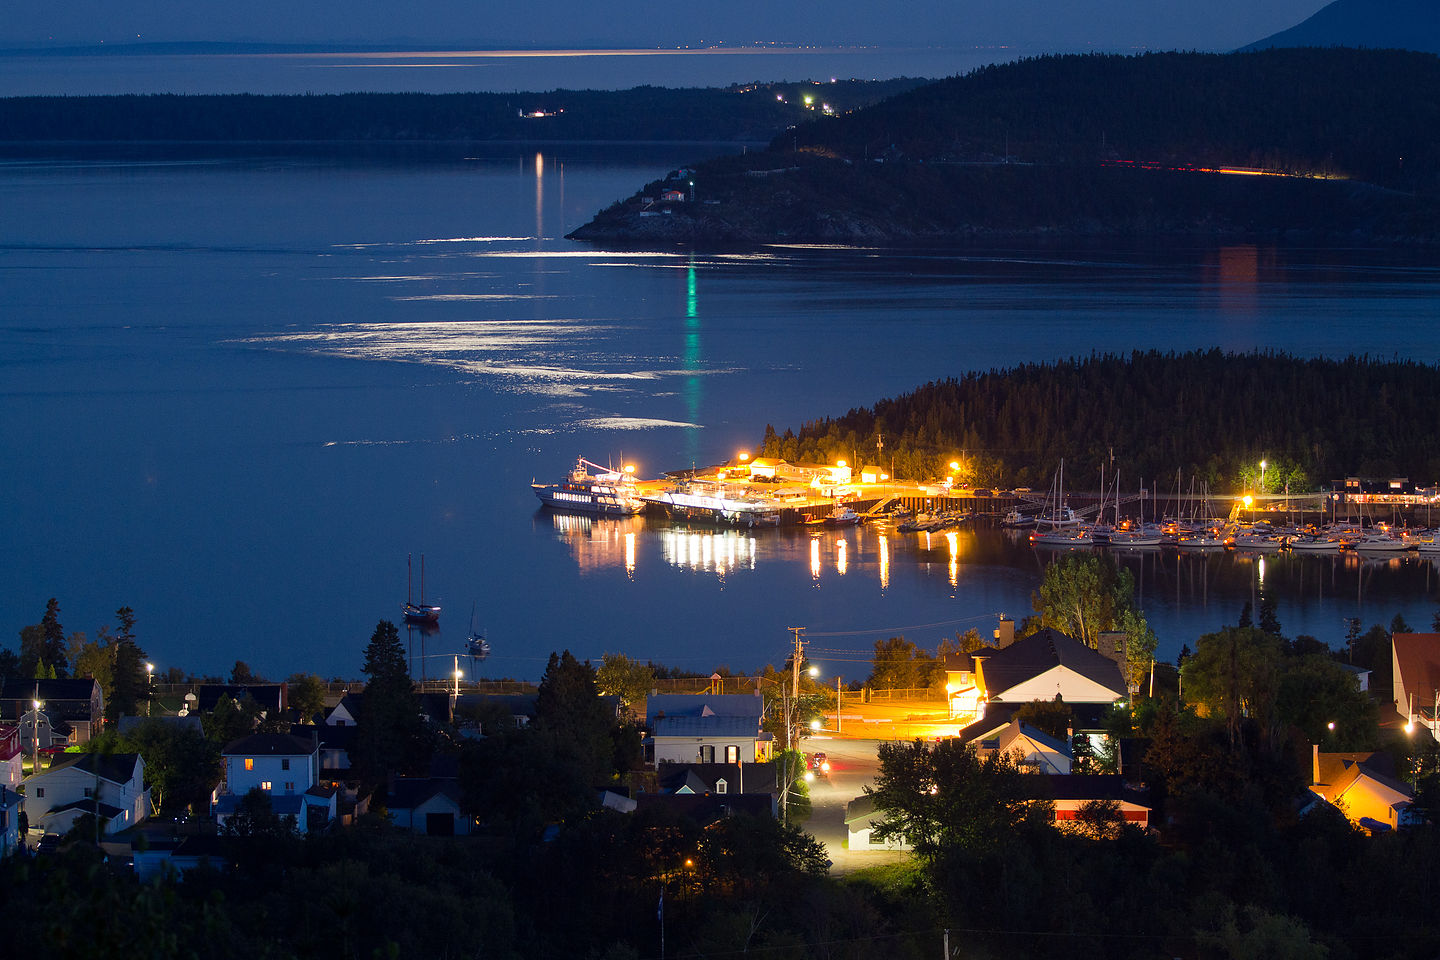 Night View of Tadoussac Village from Campground - TJG